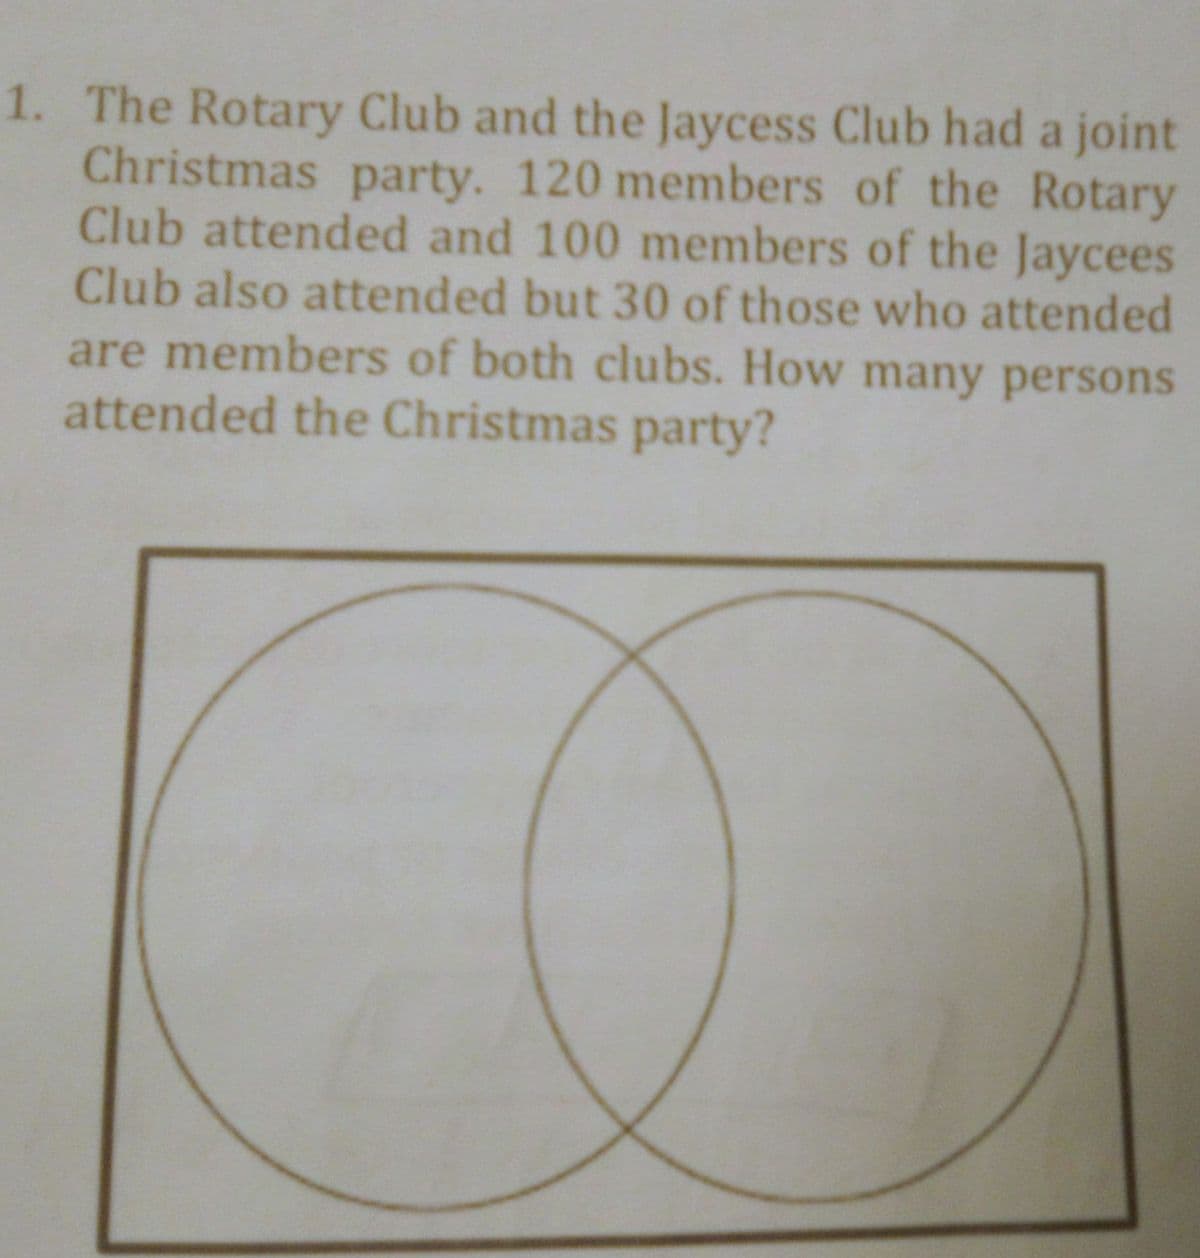 1. The Rotary Club and the Jaycess Club had a joint
Christmas party. 120 members of the Rotary
Club attended and 100 members of the Jaycees
Club also attended but 30 of those who attended
are members of both clubs. How many persons
attended the Christmas party?
